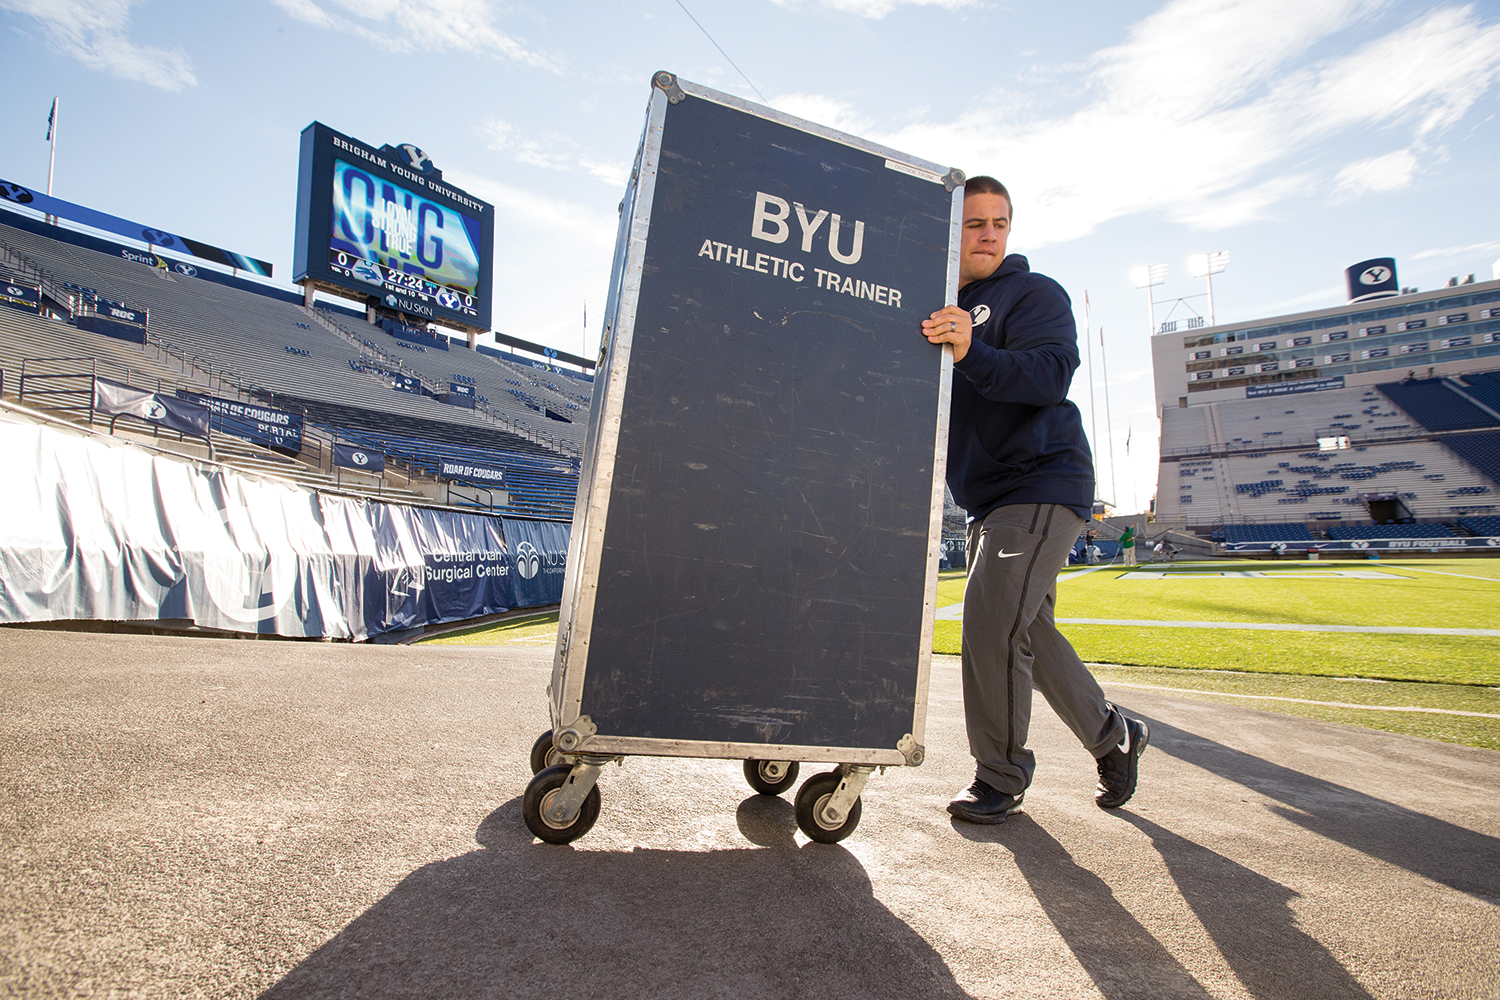 An athletic trainer moves equipment to the football field in preparation for kickoff.